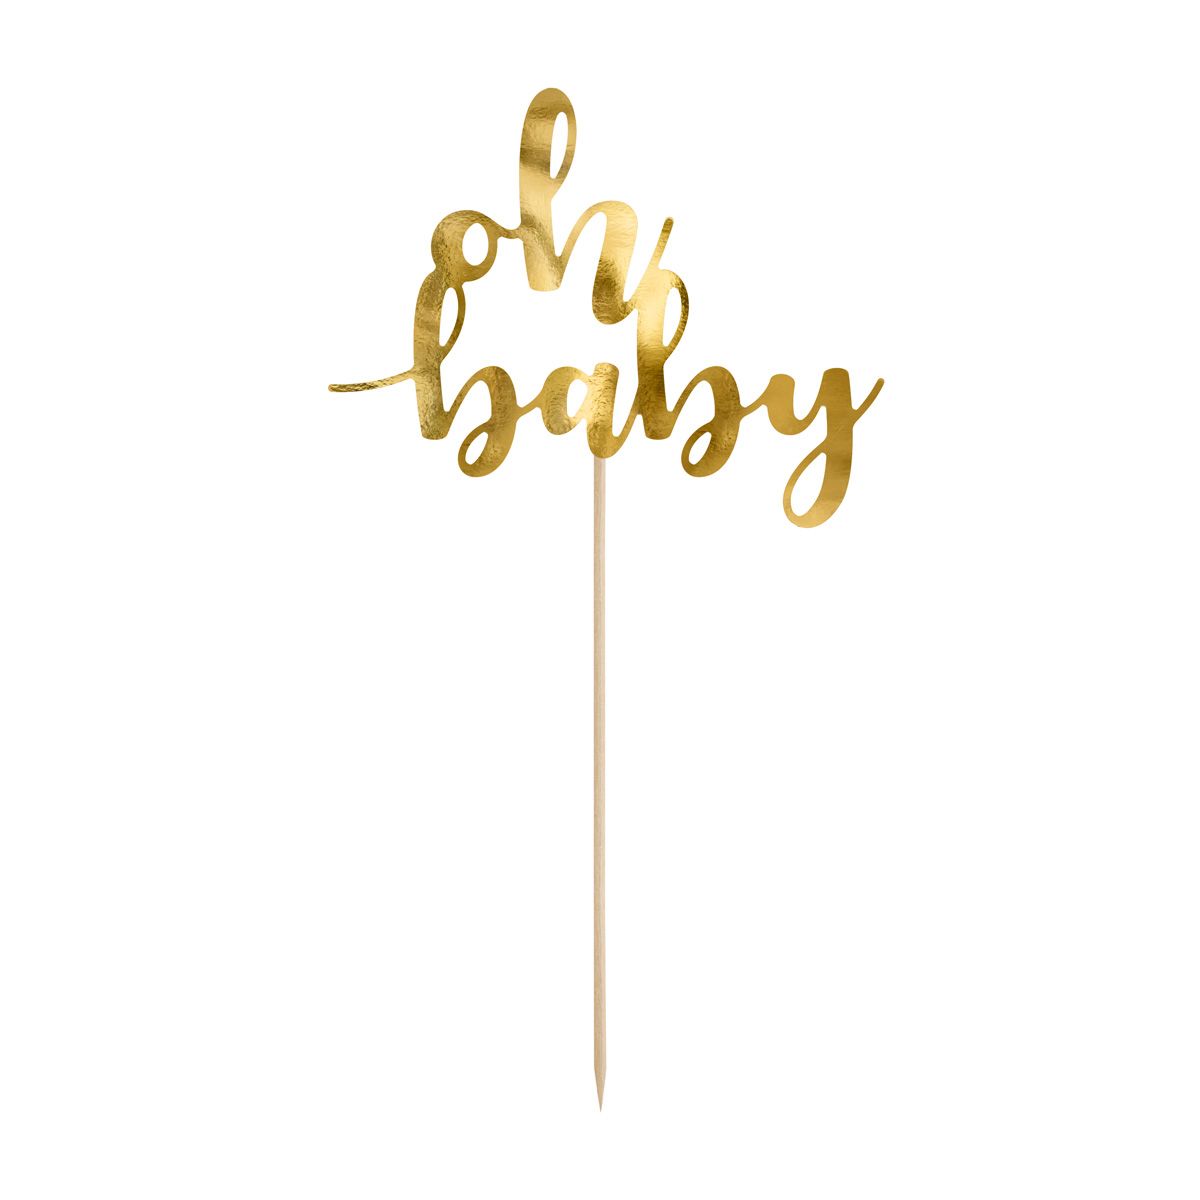 Cake topper med texten "Oh baby" I guld